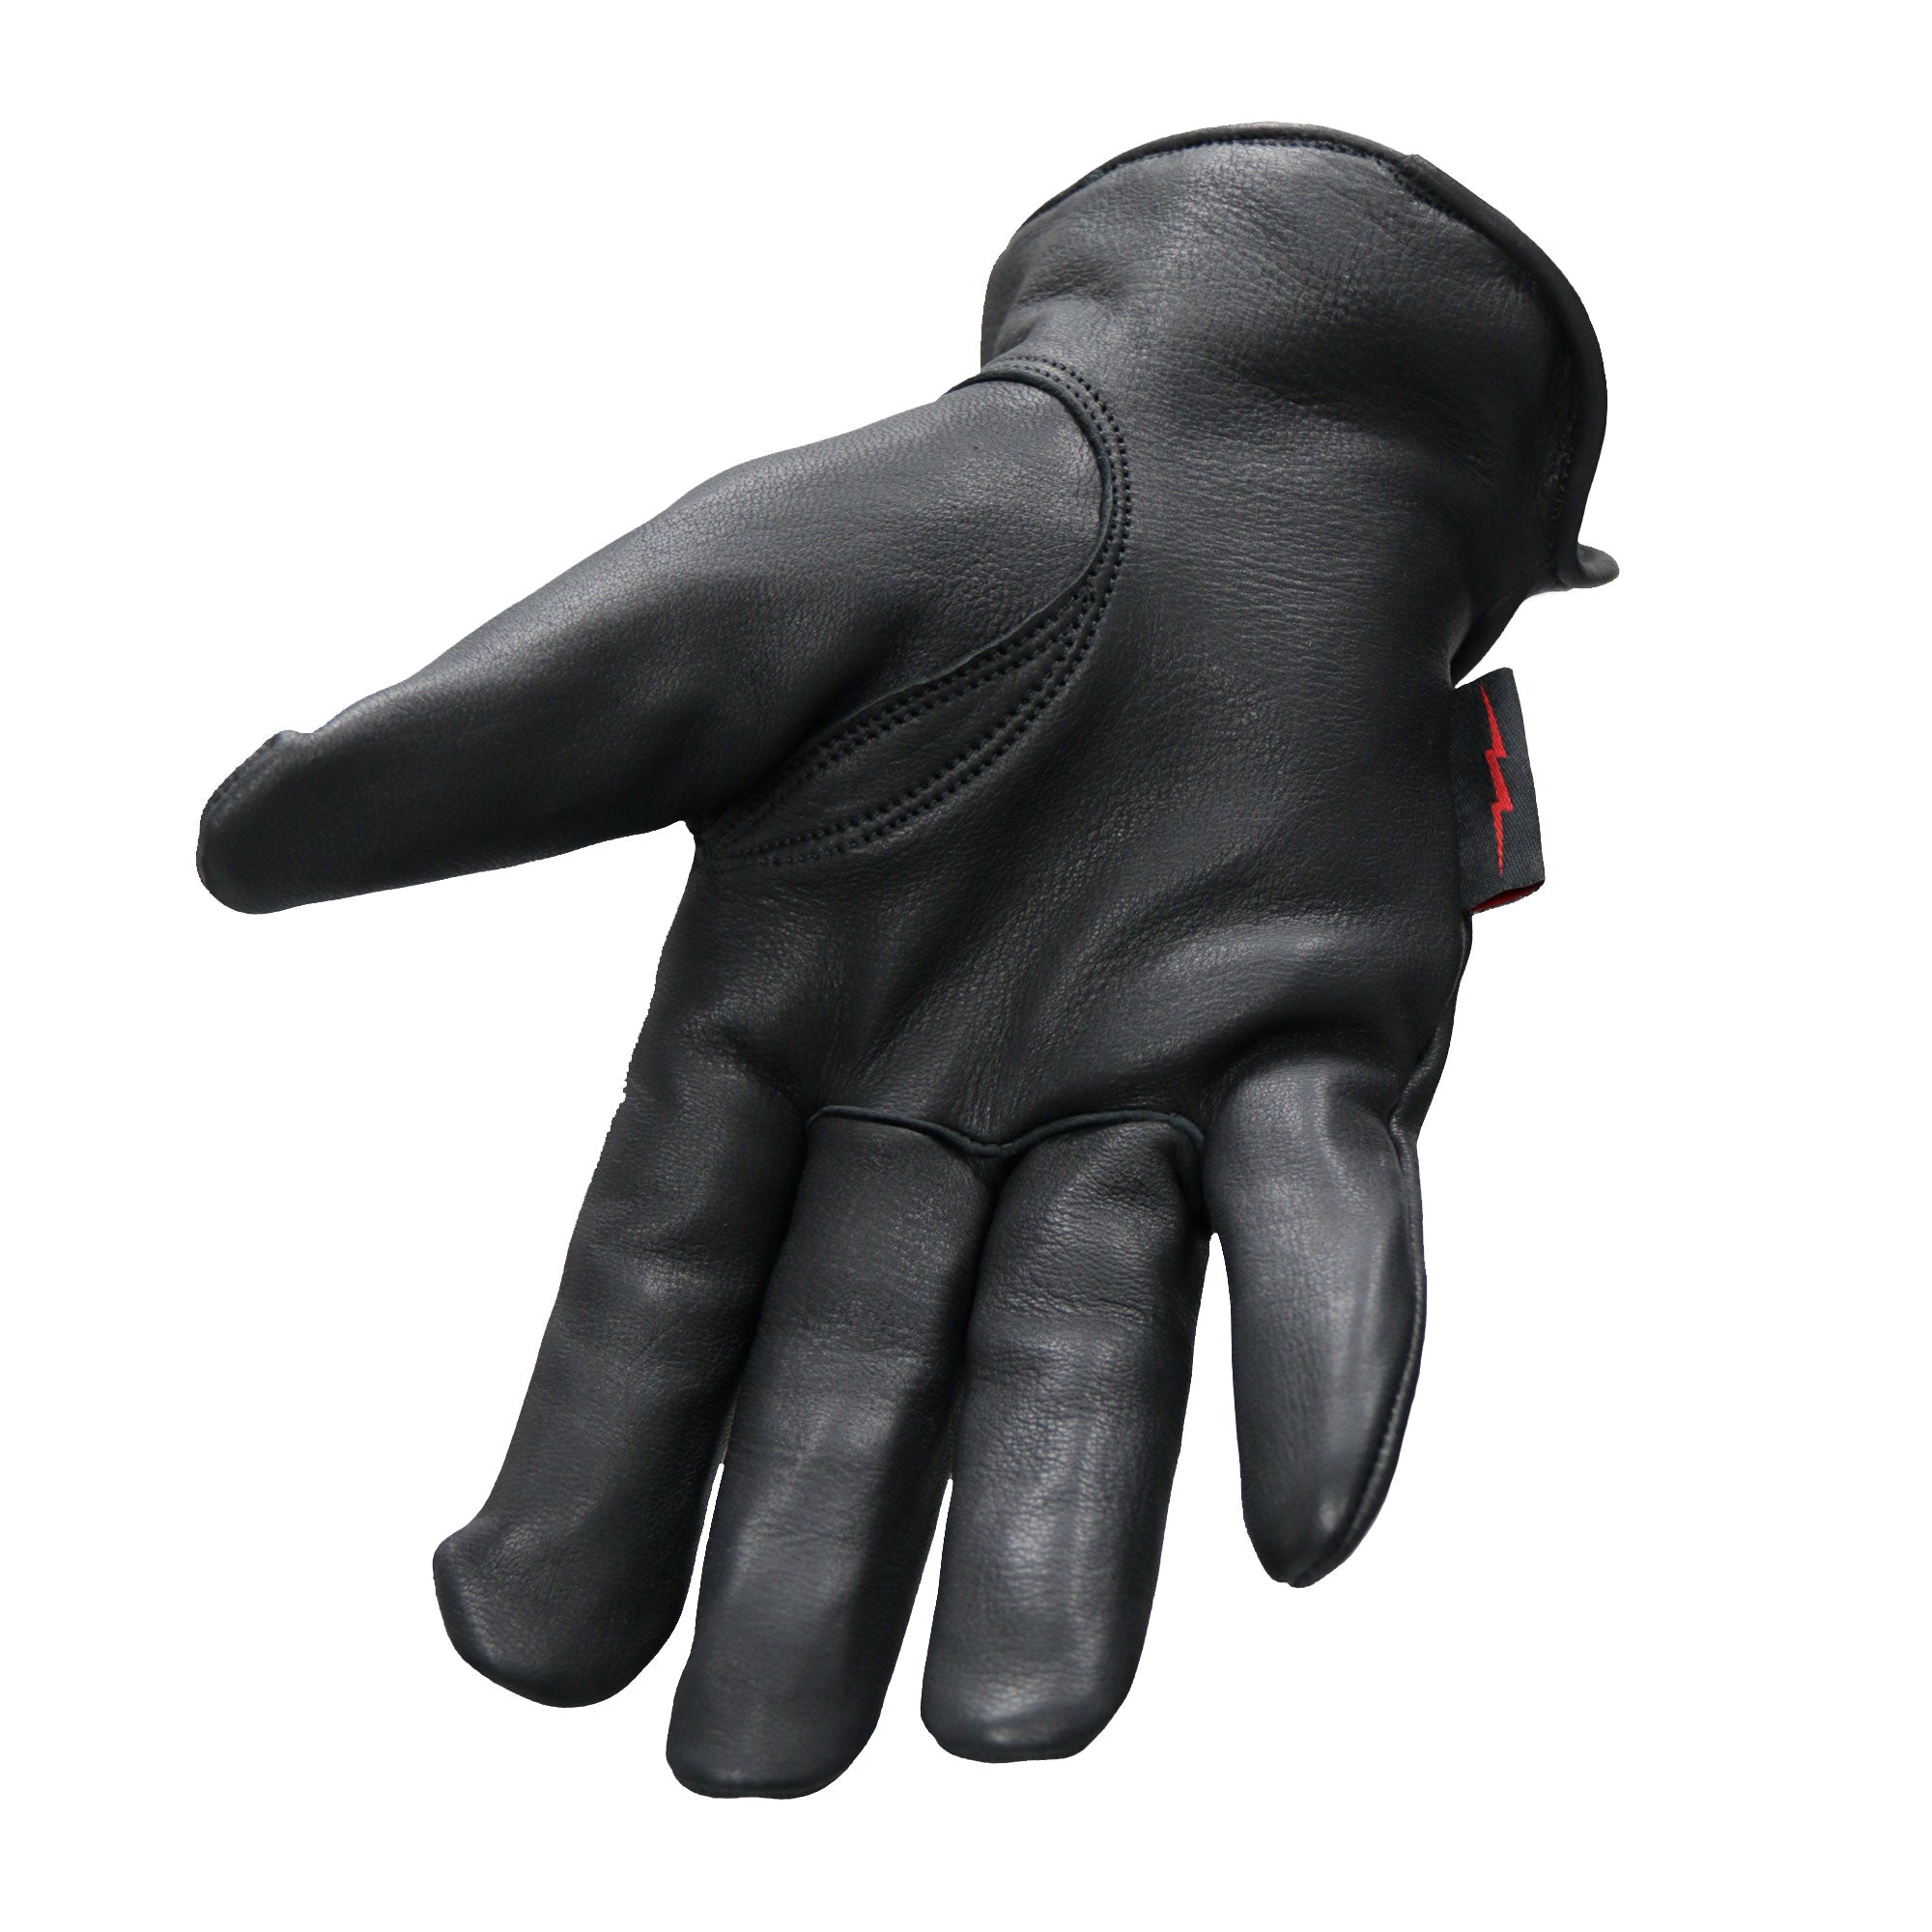 Hot Leathers GVD2004 Uni-Sex 'Red and Black Flannel Lined' Deer Skin Leather Gloves